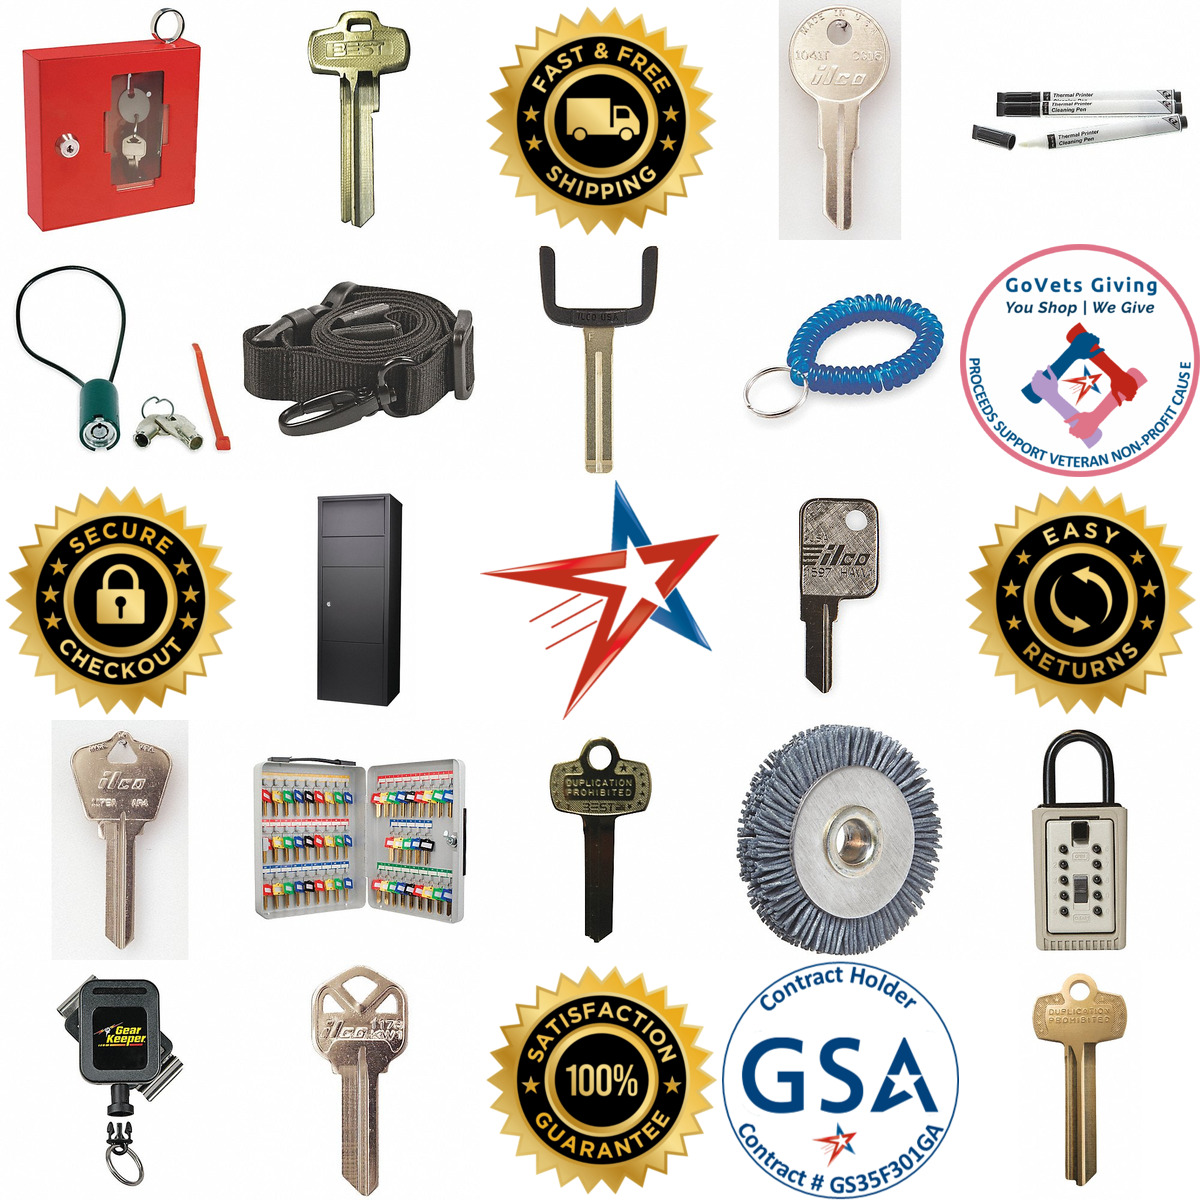 A selection of Key Control Identification products on GoVets